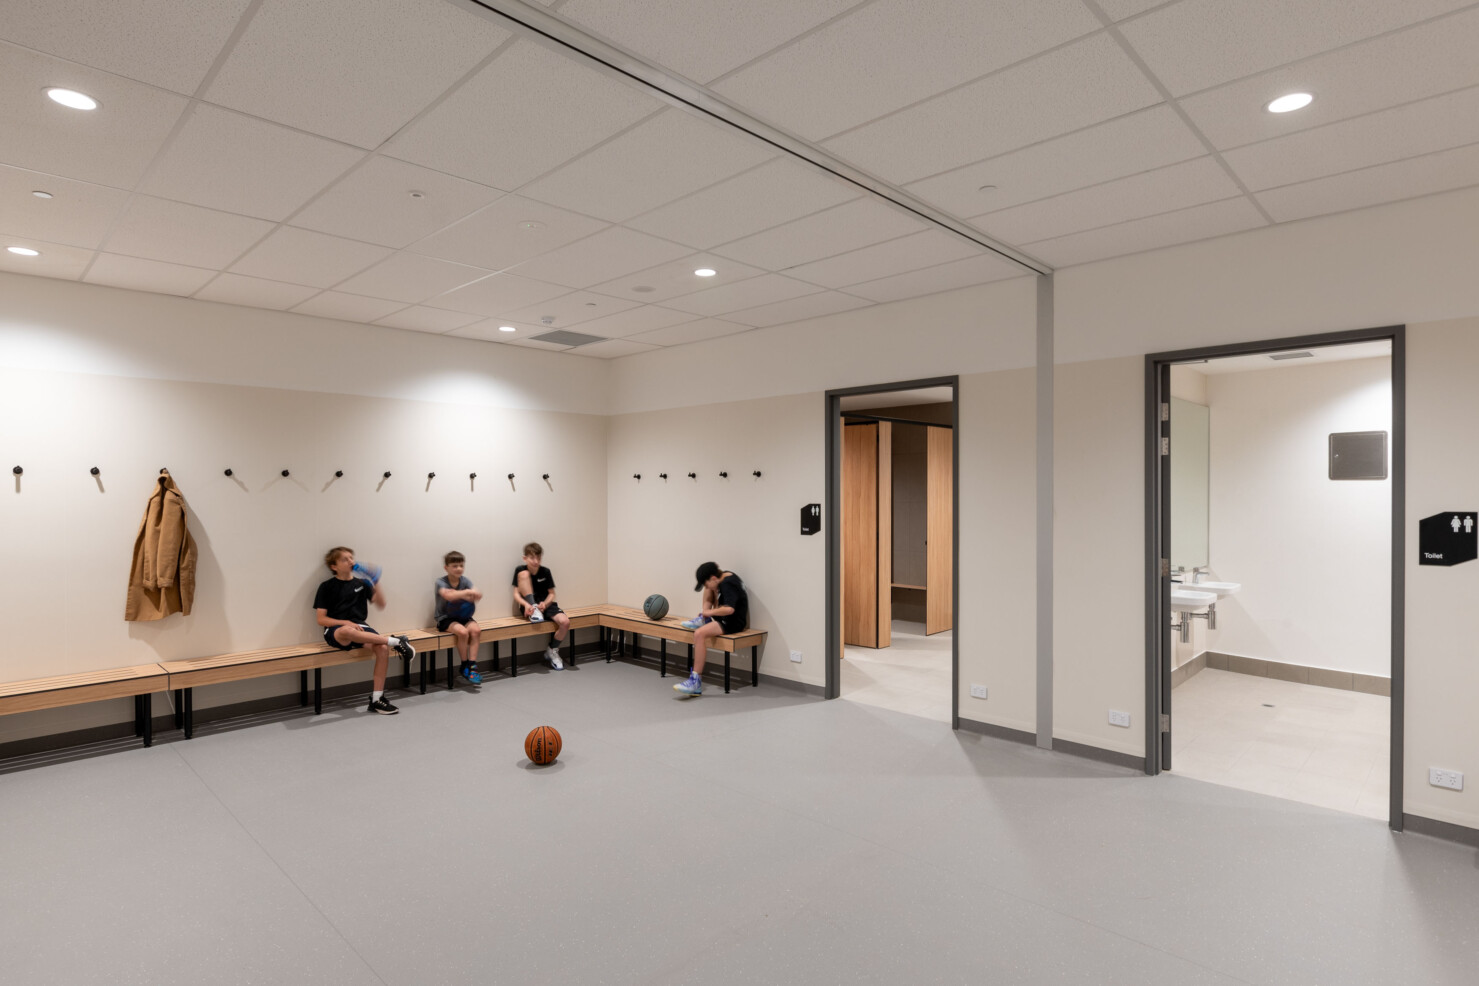 Clean and minimal change facilities provide ample space for accessibility. Kids sit with their basketballs, talking and drinking from water bottles on the light coloured timber benches.